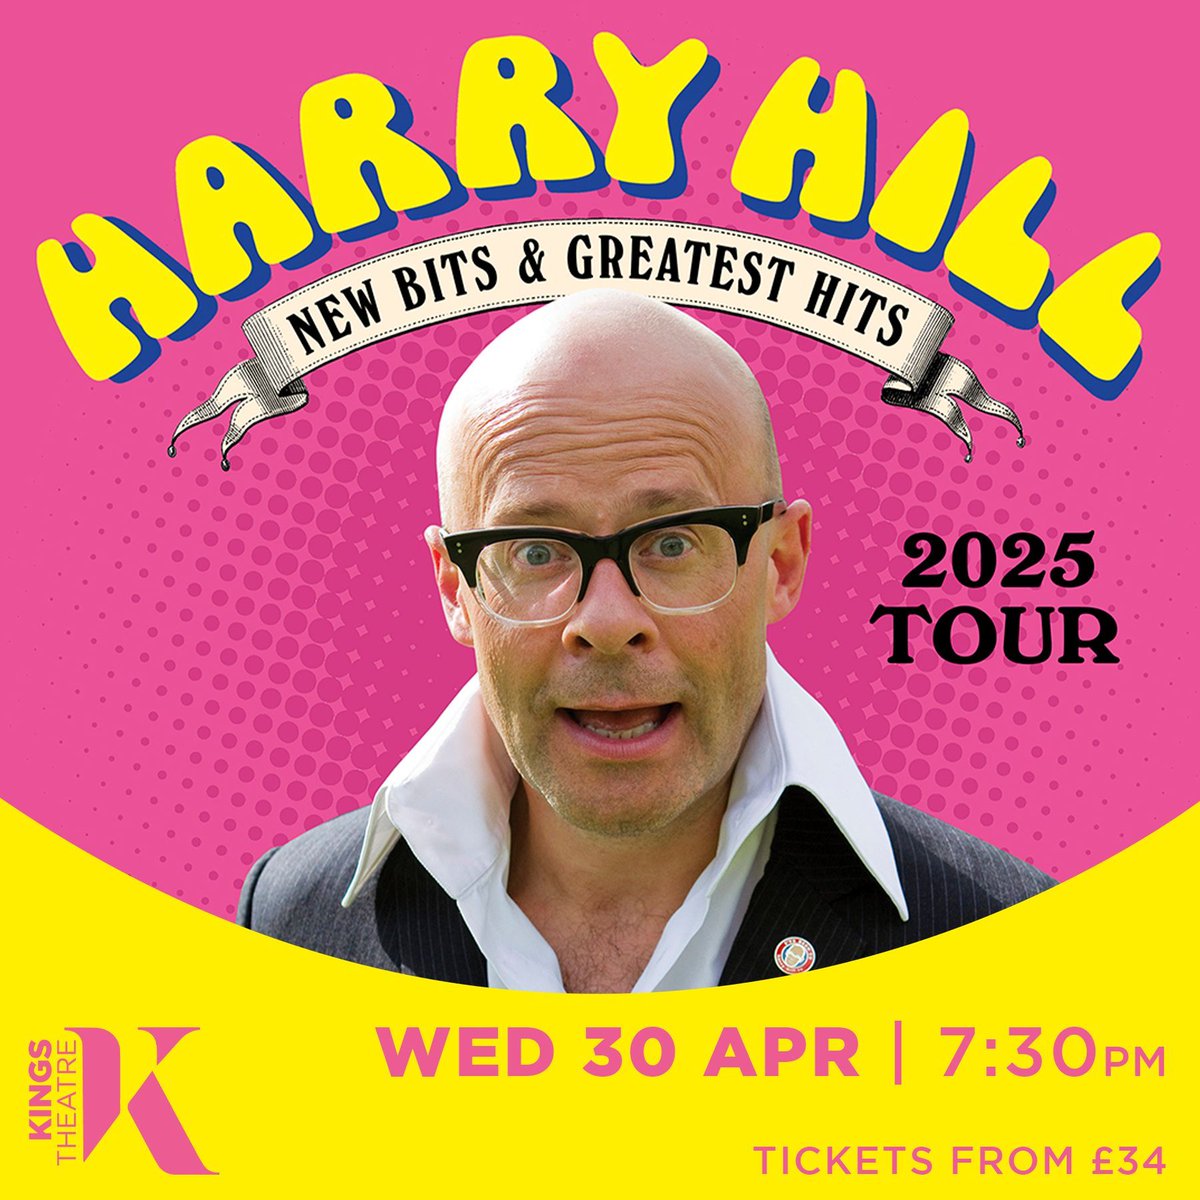 ✨NEW SHOW ANNOUNCEMENT!✨ Harry Hill | New Bits & Greatest Hits is coming to The Kings in 2025! Join him on his Diamond Jubilee lap of honour as he celebrates 60 Glorious Years of fun, laughter and low level disruption! 👓 📅 Wed 30 Apr 2025 🎟️ General sale Friday 10 May 11am